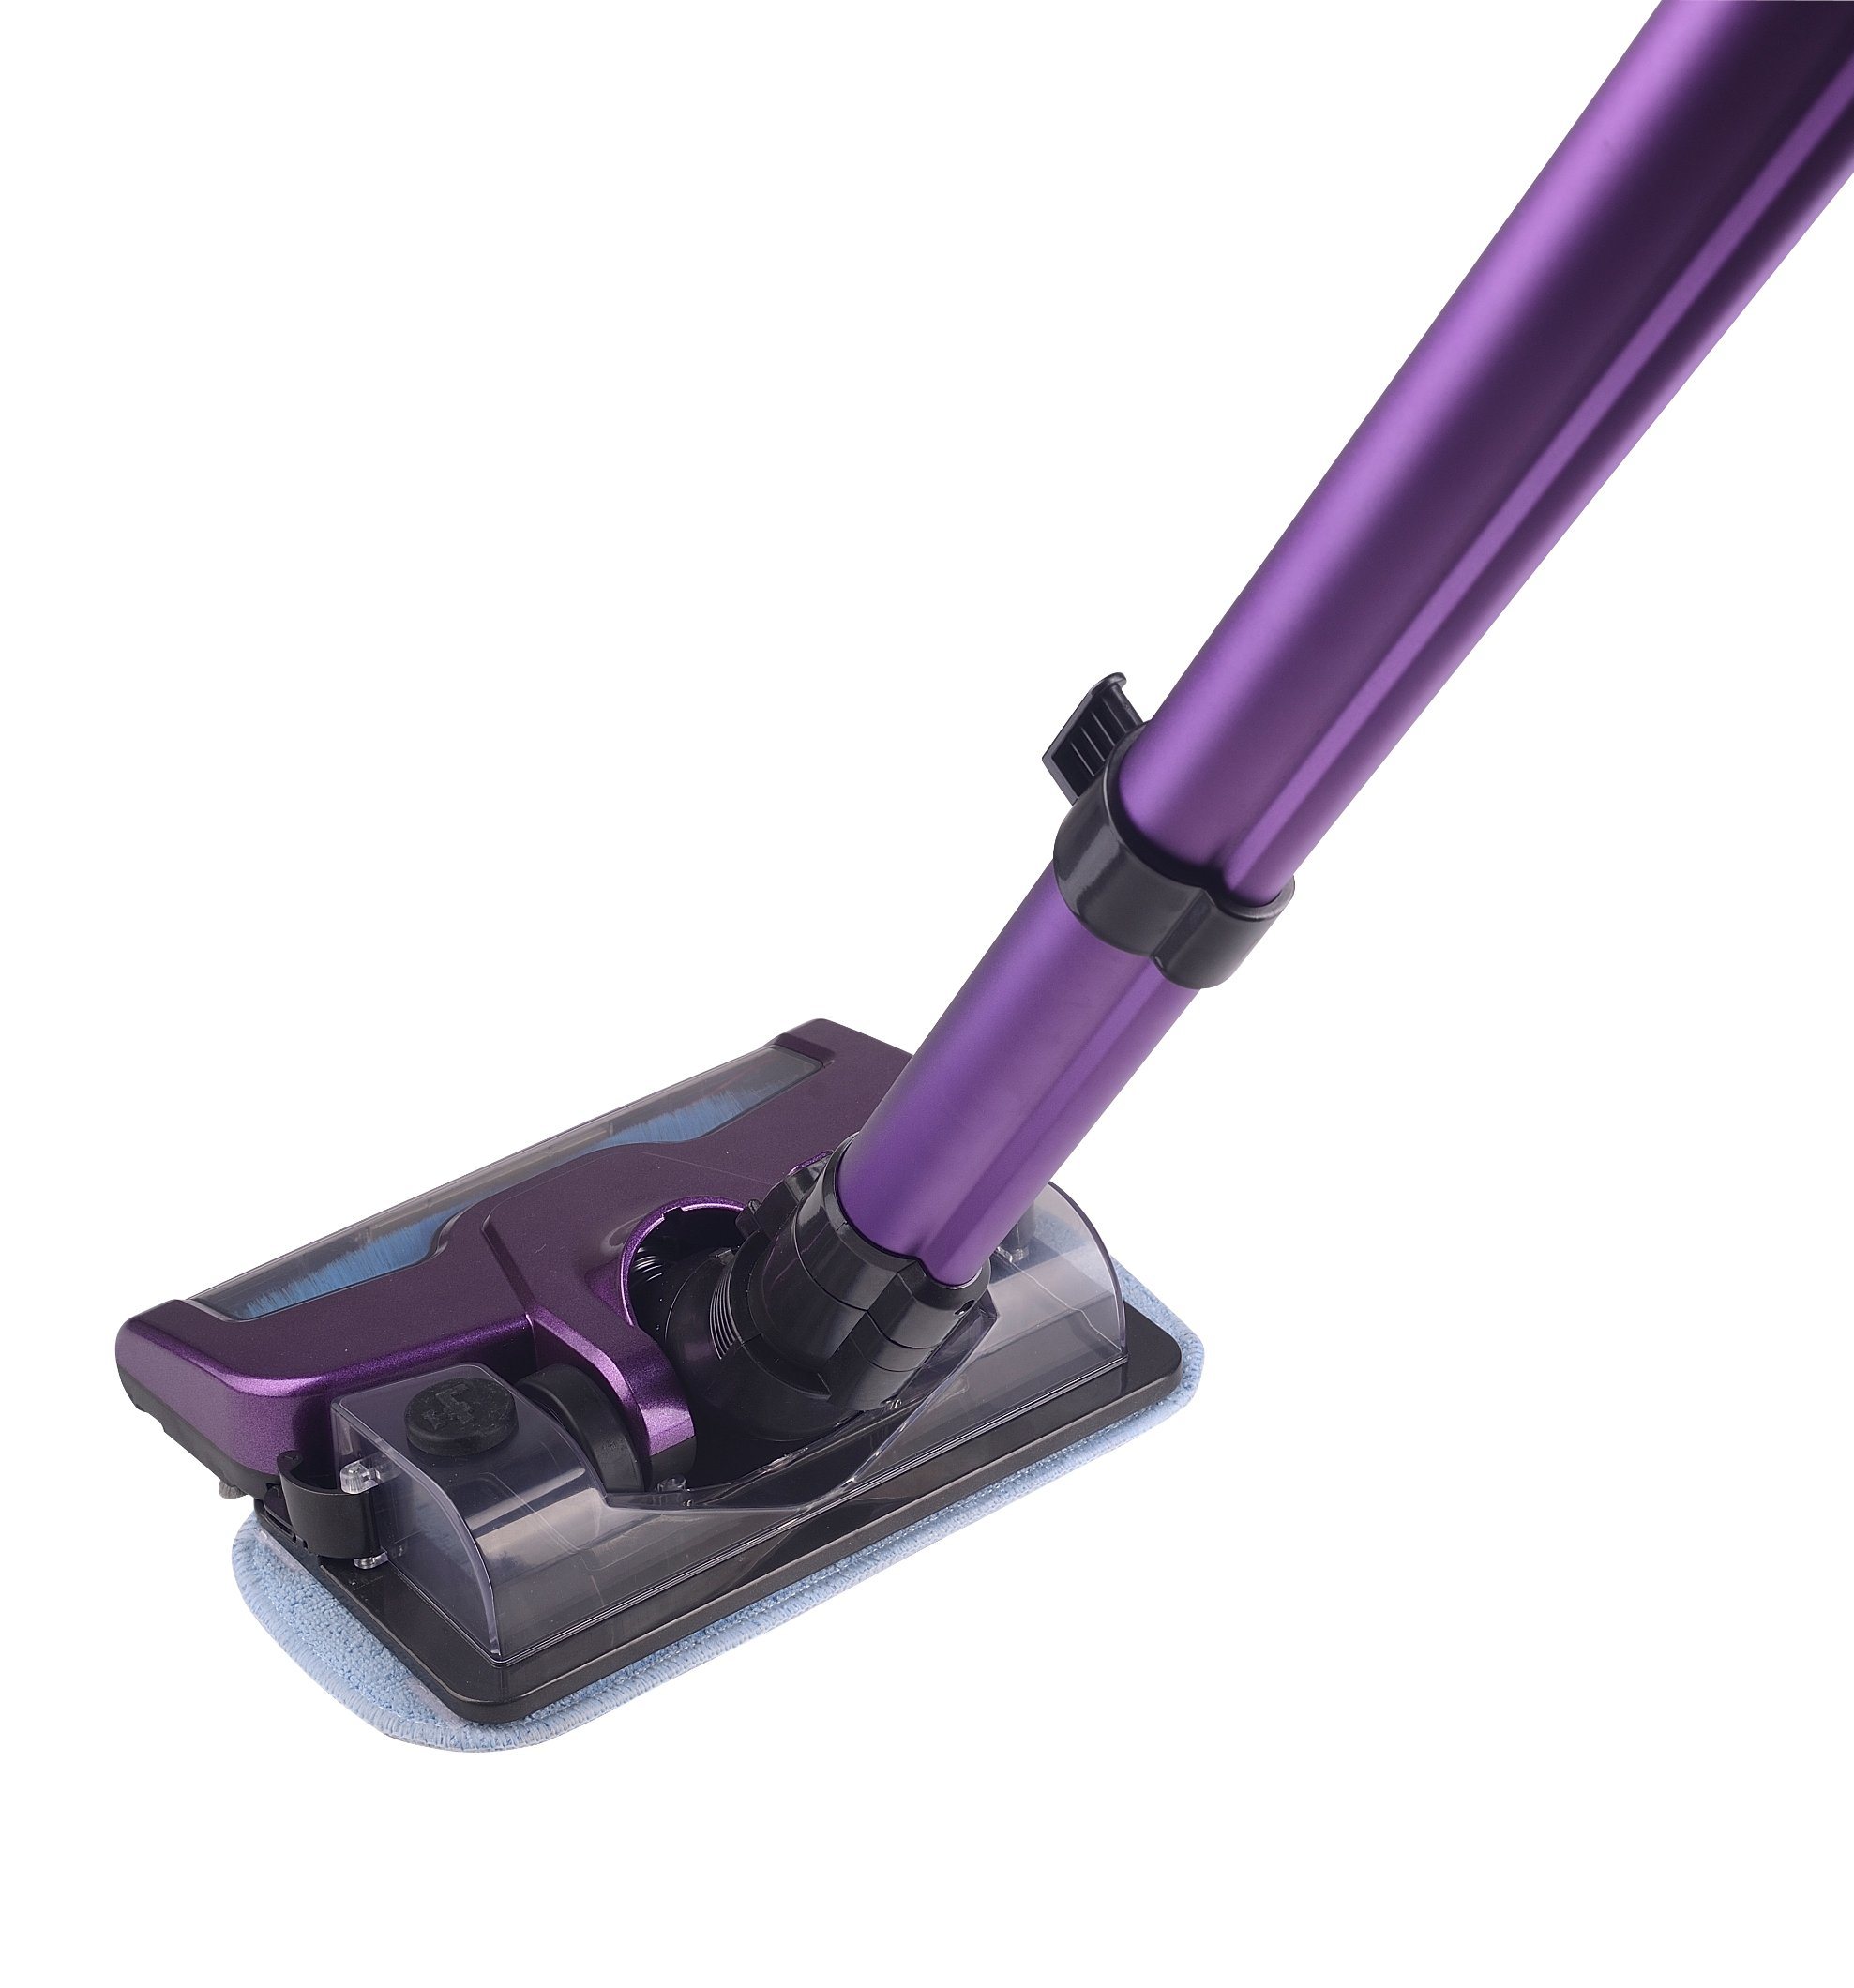 Newest-Cordless-Vacuum-Cleaner-for-Home-Clean (3)